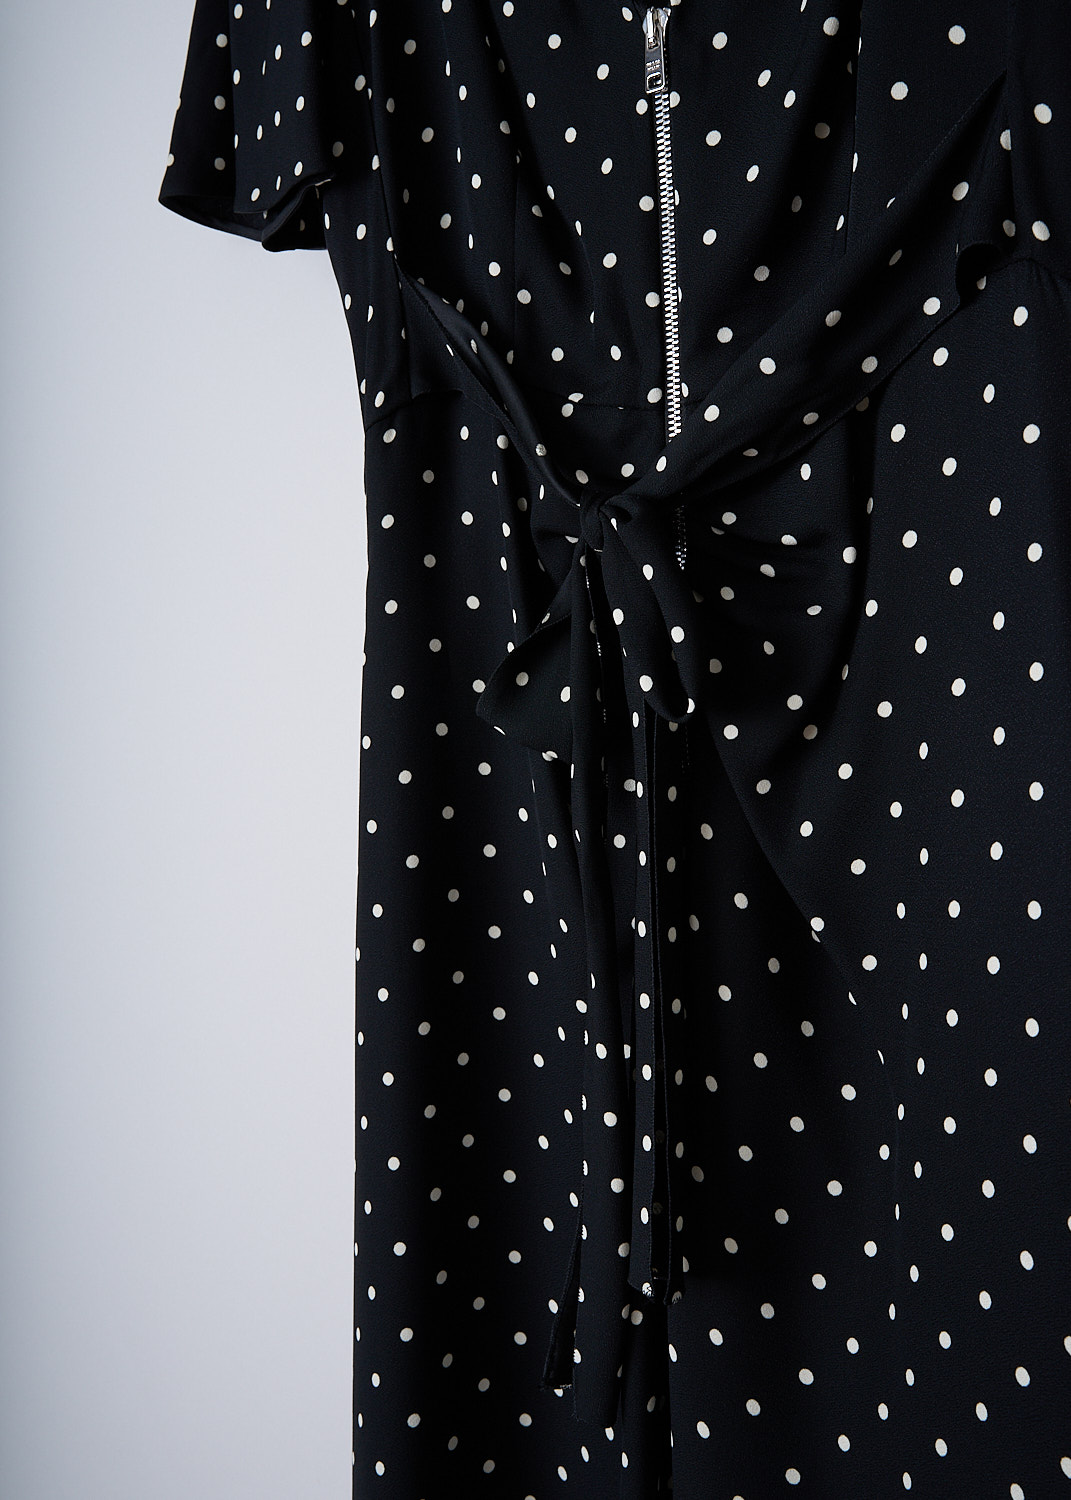 PRADA, BLACK MIDI DRESS WITH WHITE POLKA DOT PRINT, SABLE_POIS_ABITO_P3D14_1YH2_F057Z,  Black, White, Print, Detail, This short sleeve midi dress has a black base color with a small white polka dot print. The dress has a V-neckline. In the front, a two-way zip runs down the length of the dress with gathered pleats along the zipper. Below the buste, two ties can be used to cinch in the dress. The dress has a straight hemline.
